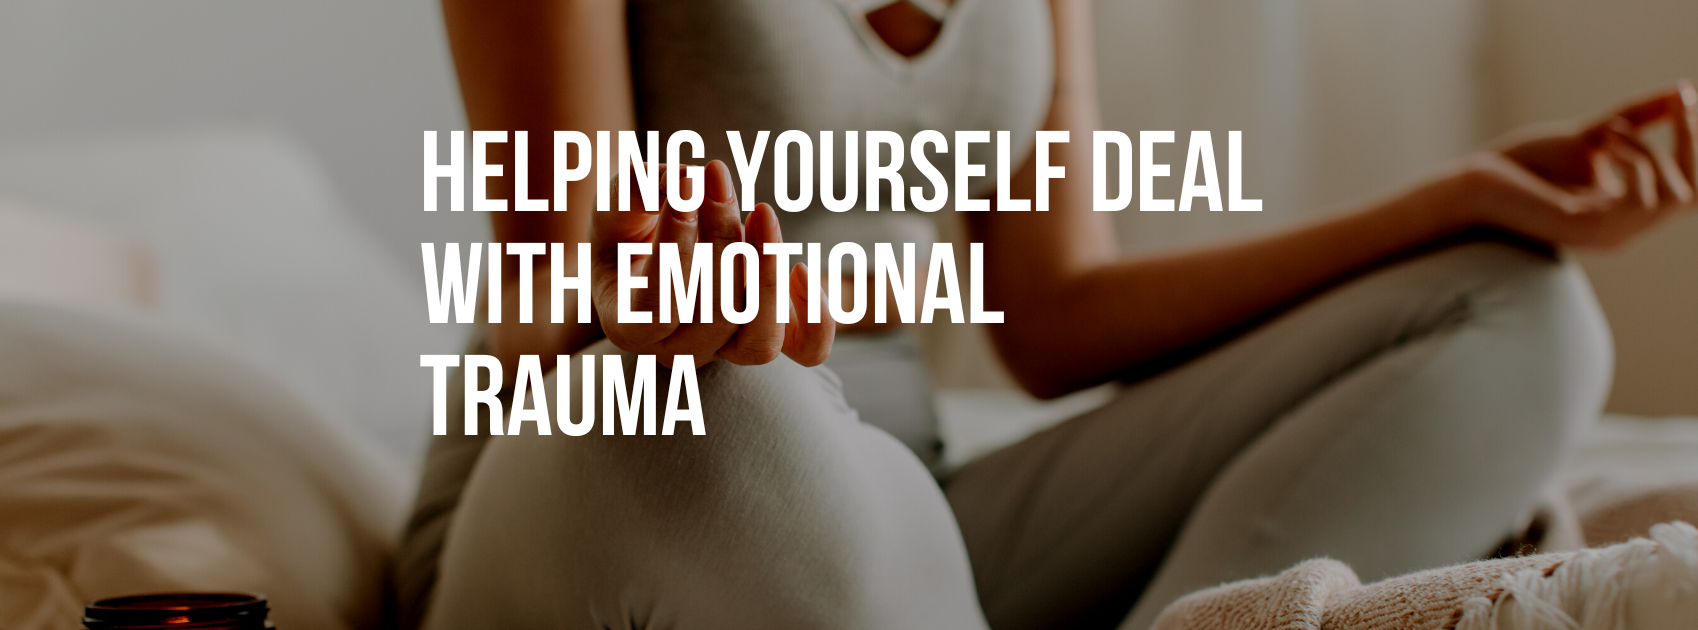 Helping Yourself Deal With Emotional Trauma